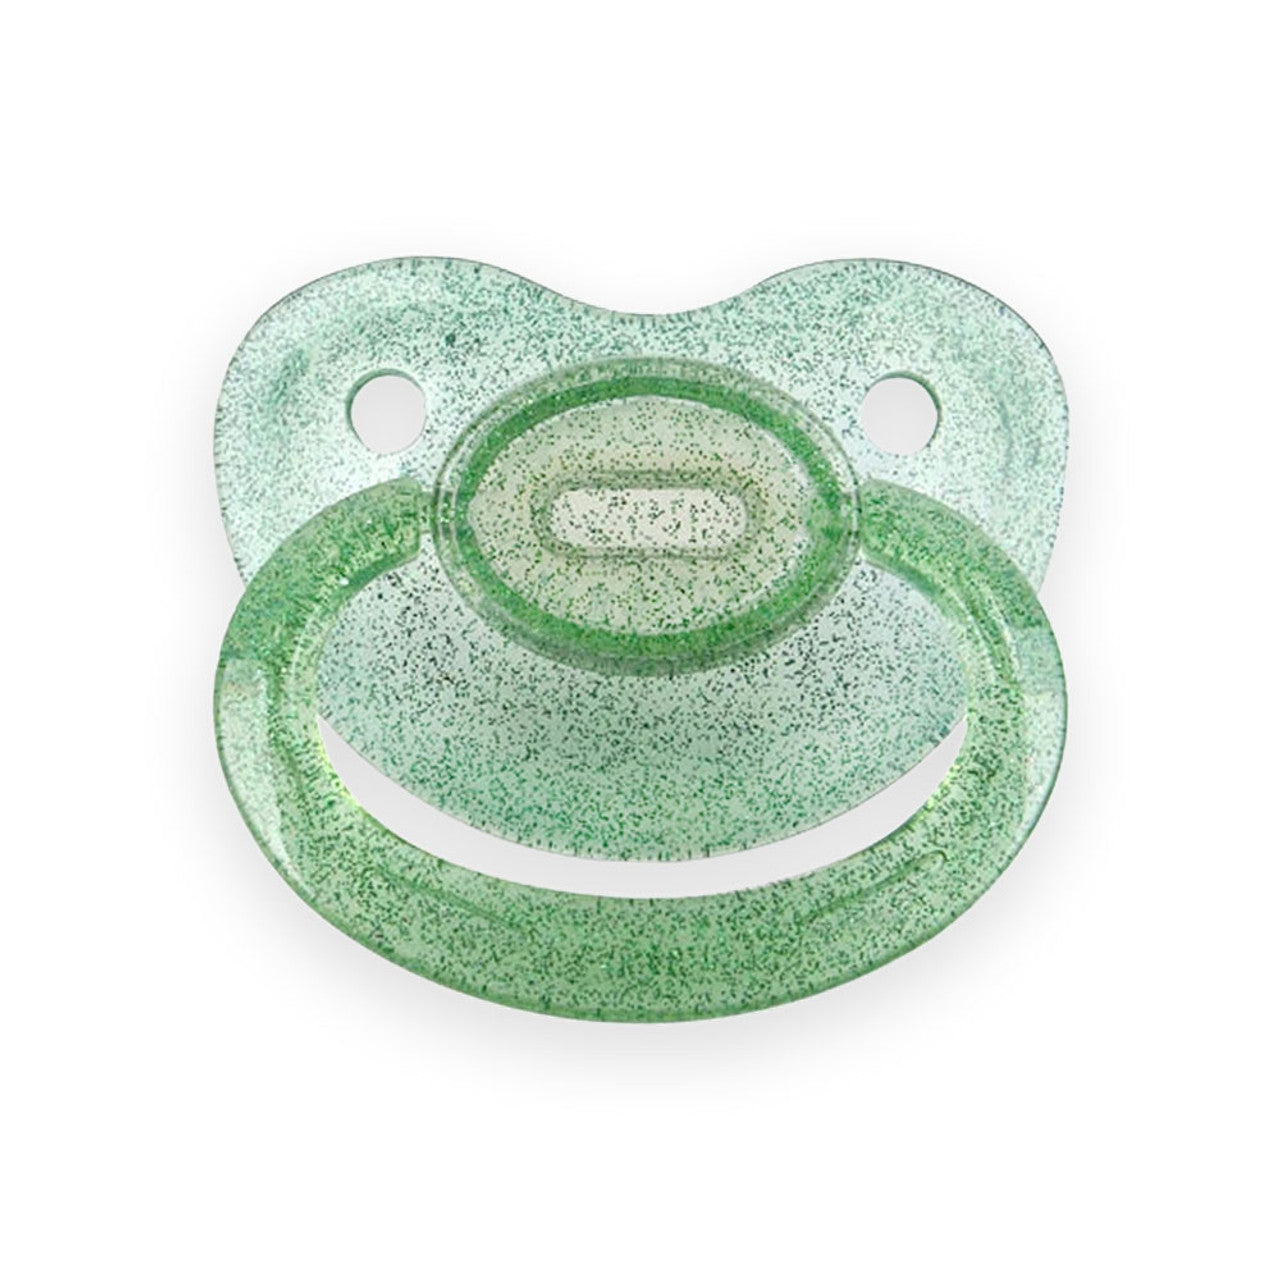 Adult Size 6 Pacifier glittery green 